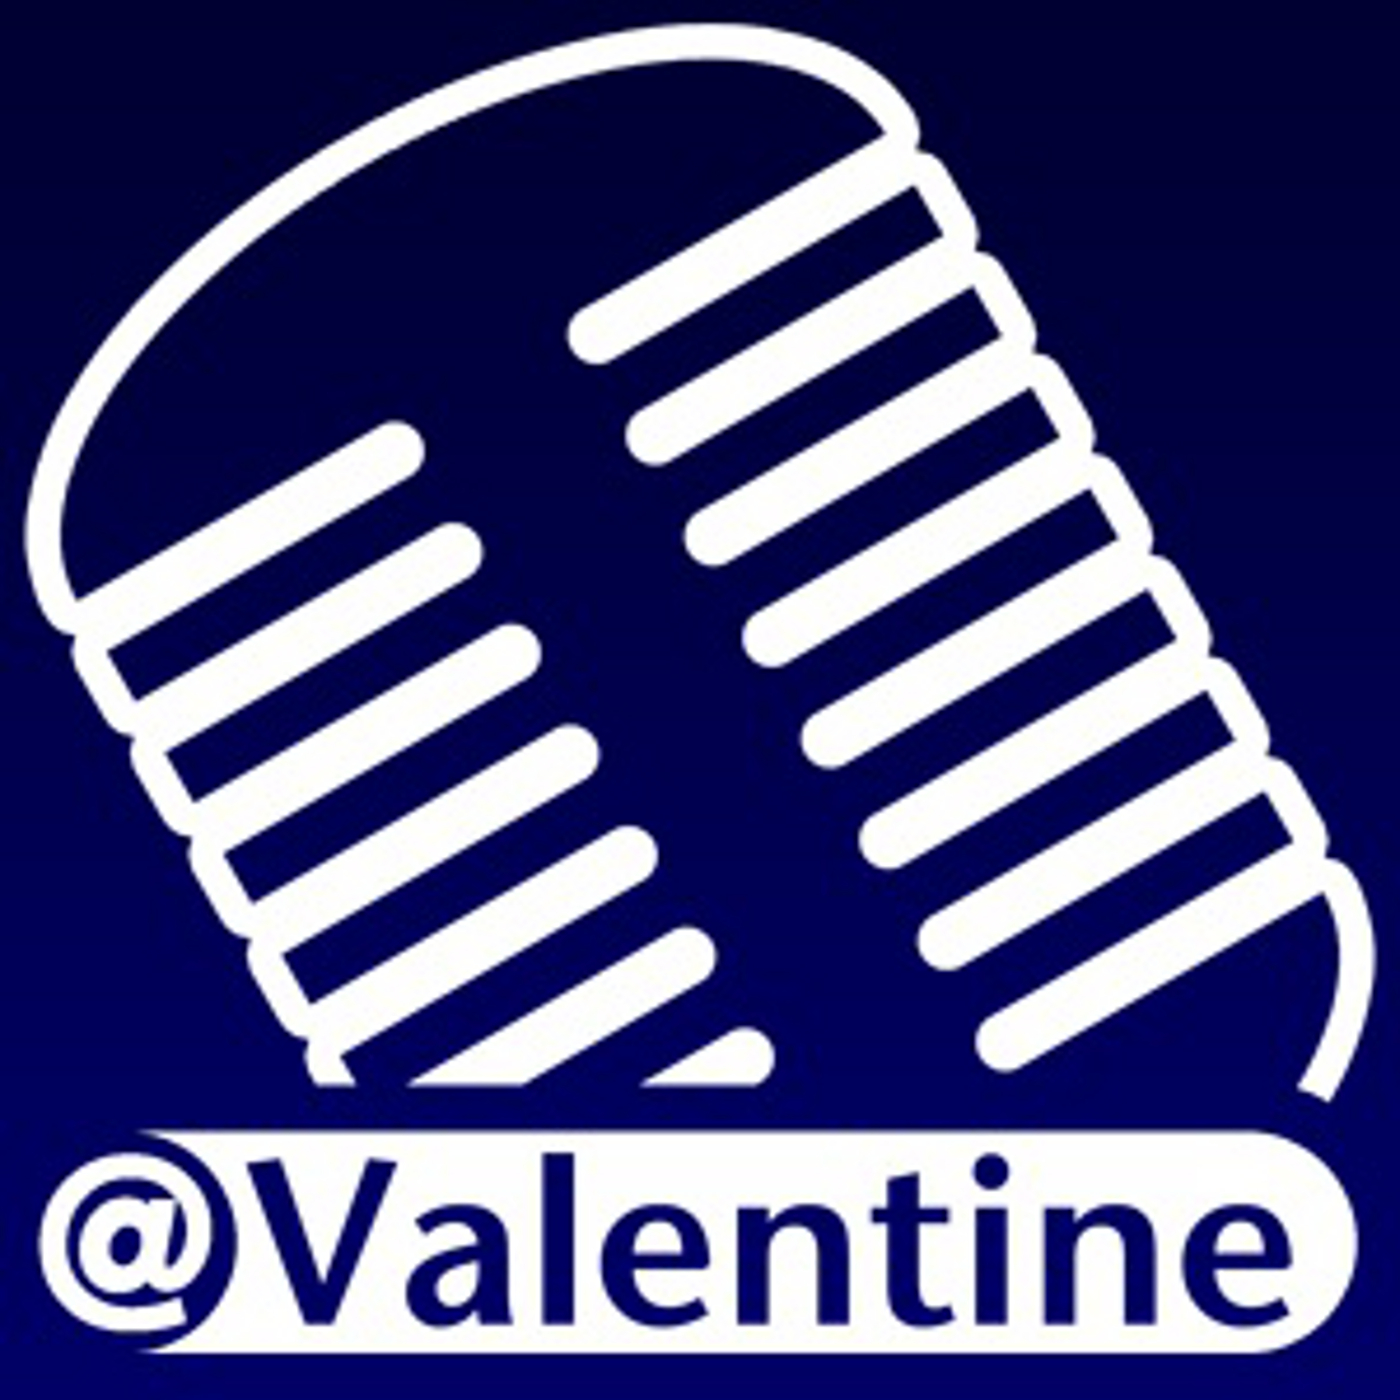 ValentineCast Episode #220 - Extremely Late